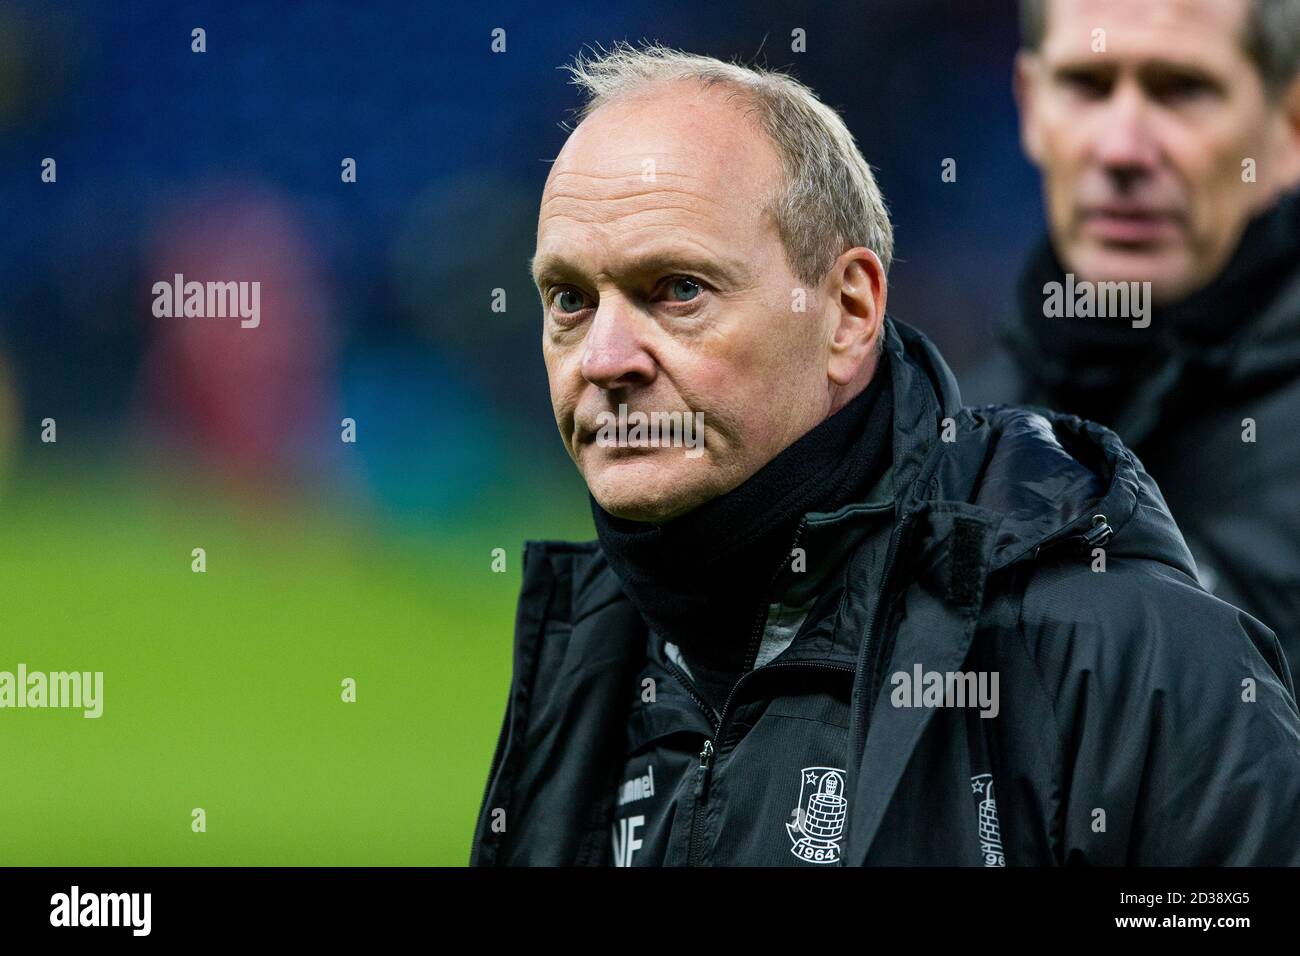 Brondby, Denmark. 01st, March 2020. coach Niels Frederiksen of Broendby IF seen during the 3F Superliga match between Broendby IF Lyngby Boldklub at Brondby Stadium. credit: Gonzales Photo -